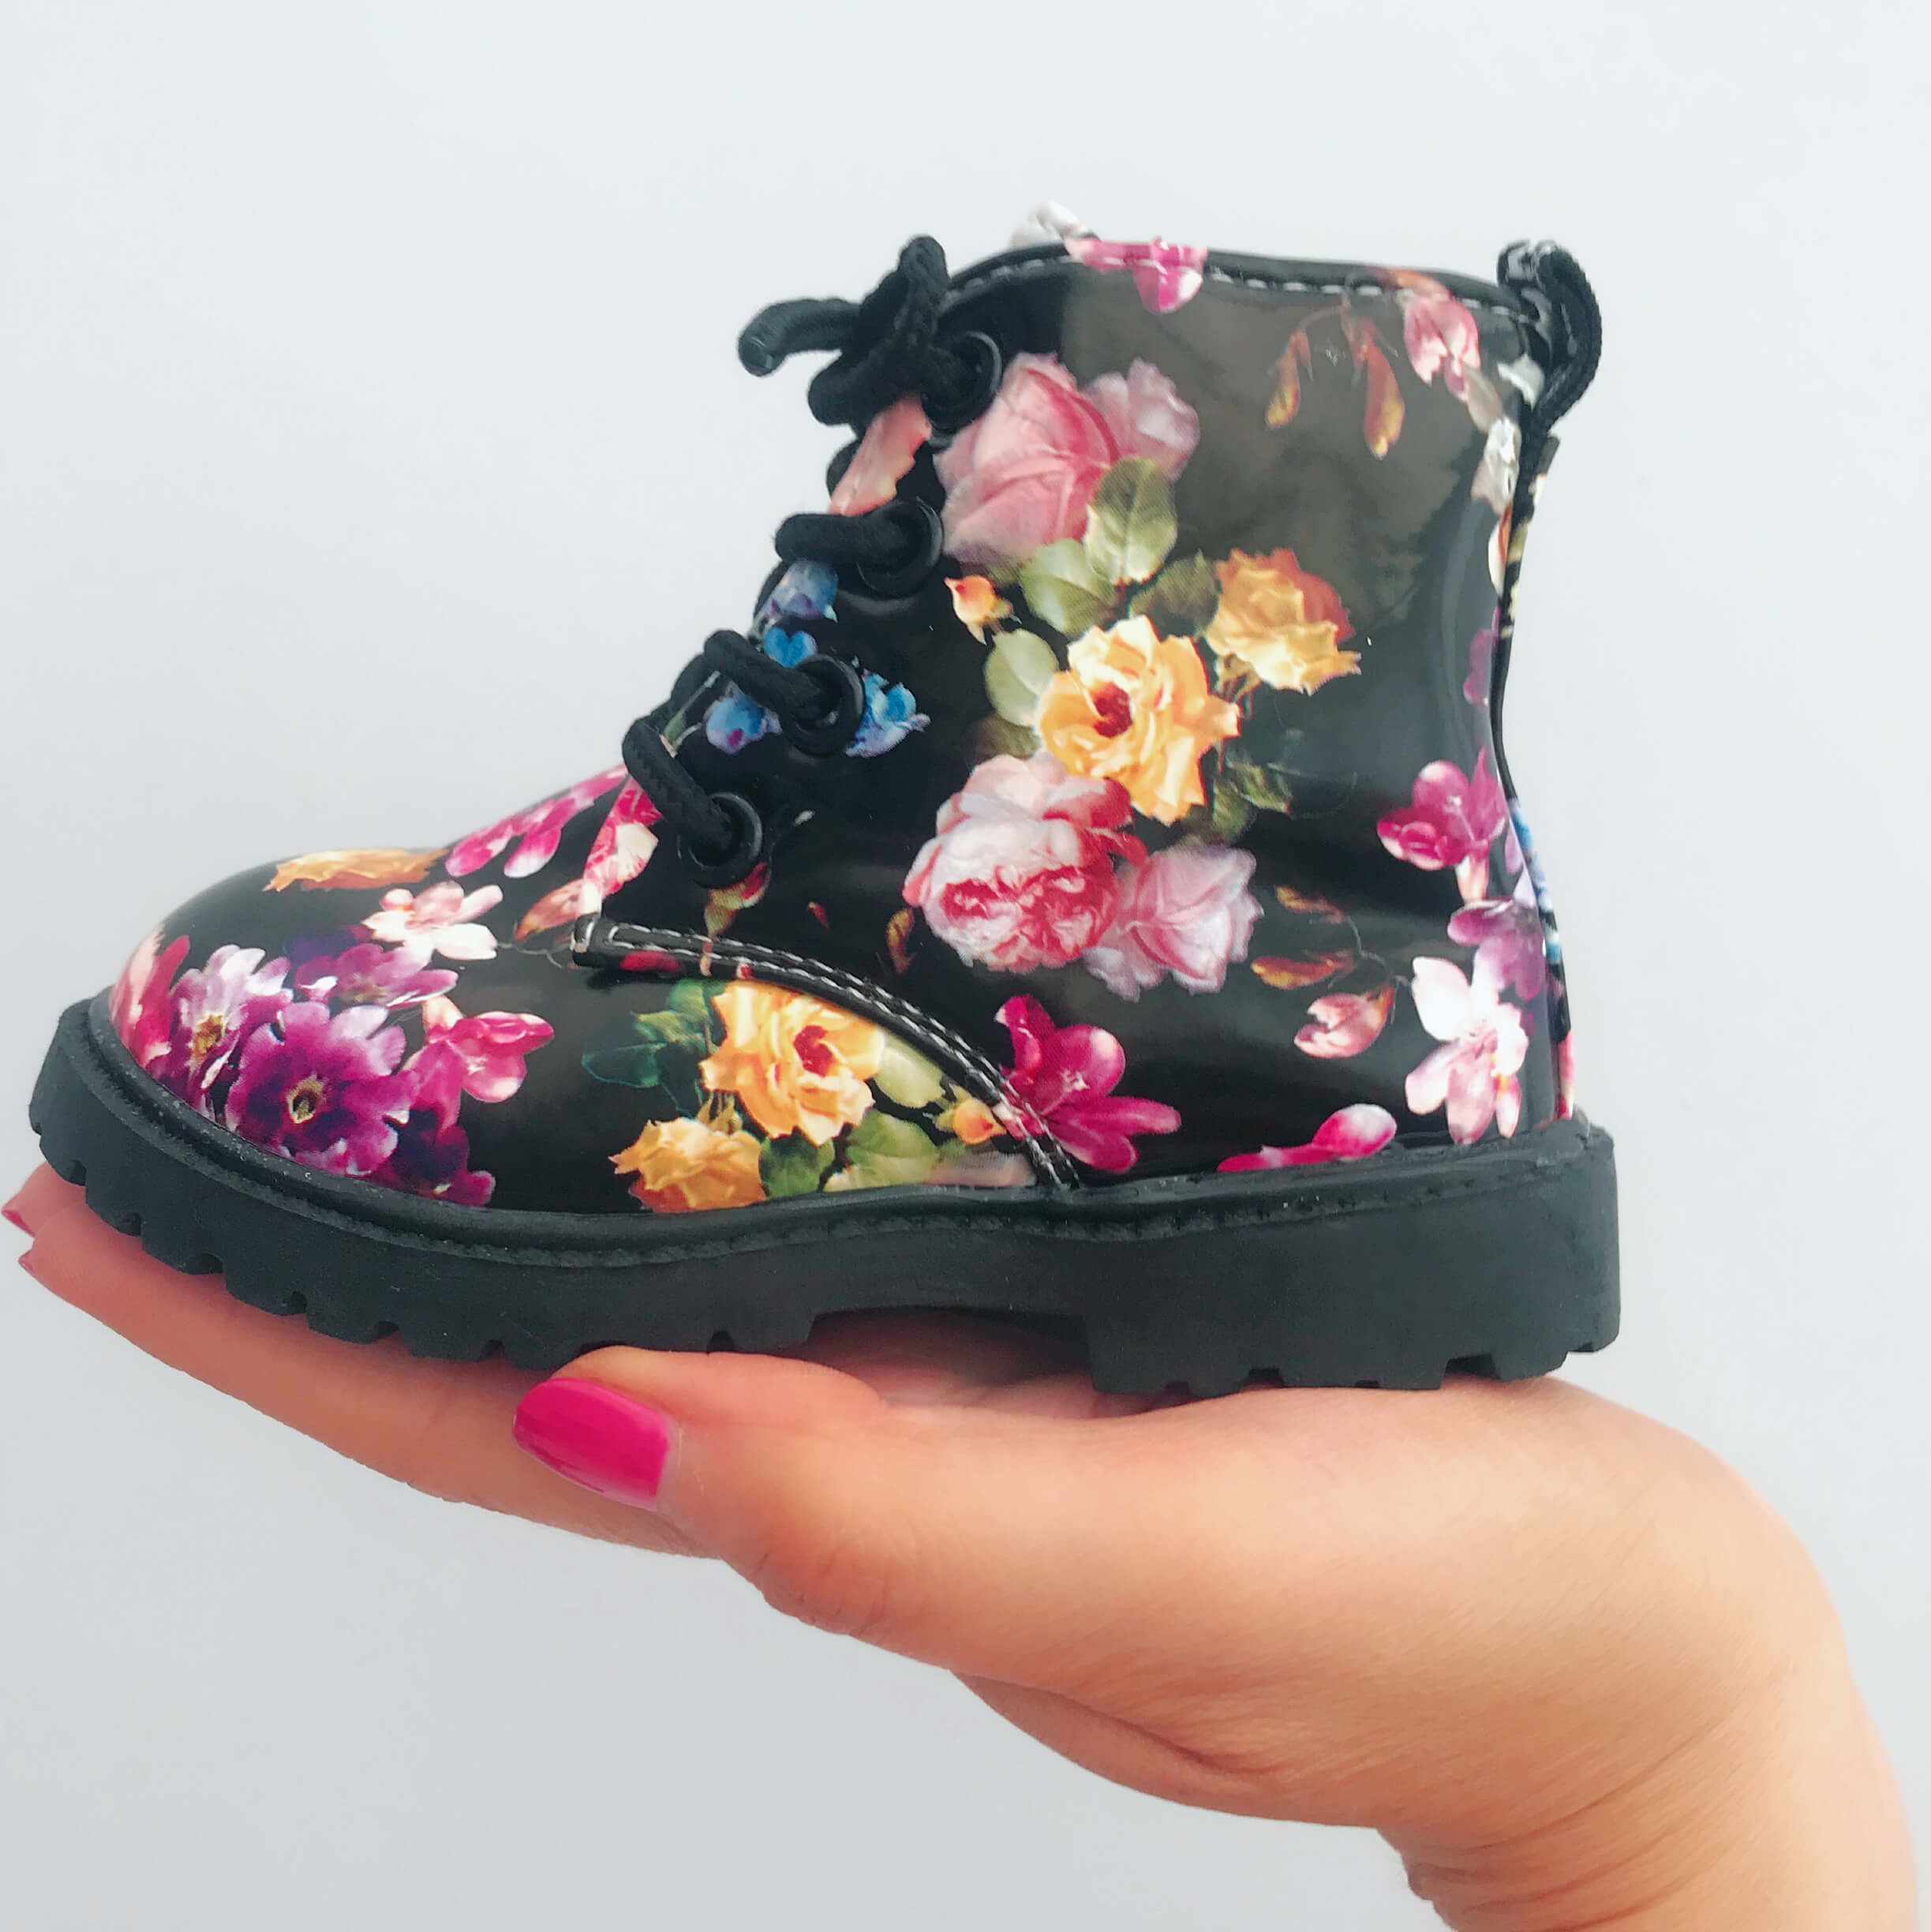 Itty Bitty Limited Edition Black Floral Boots - Itty Bitty